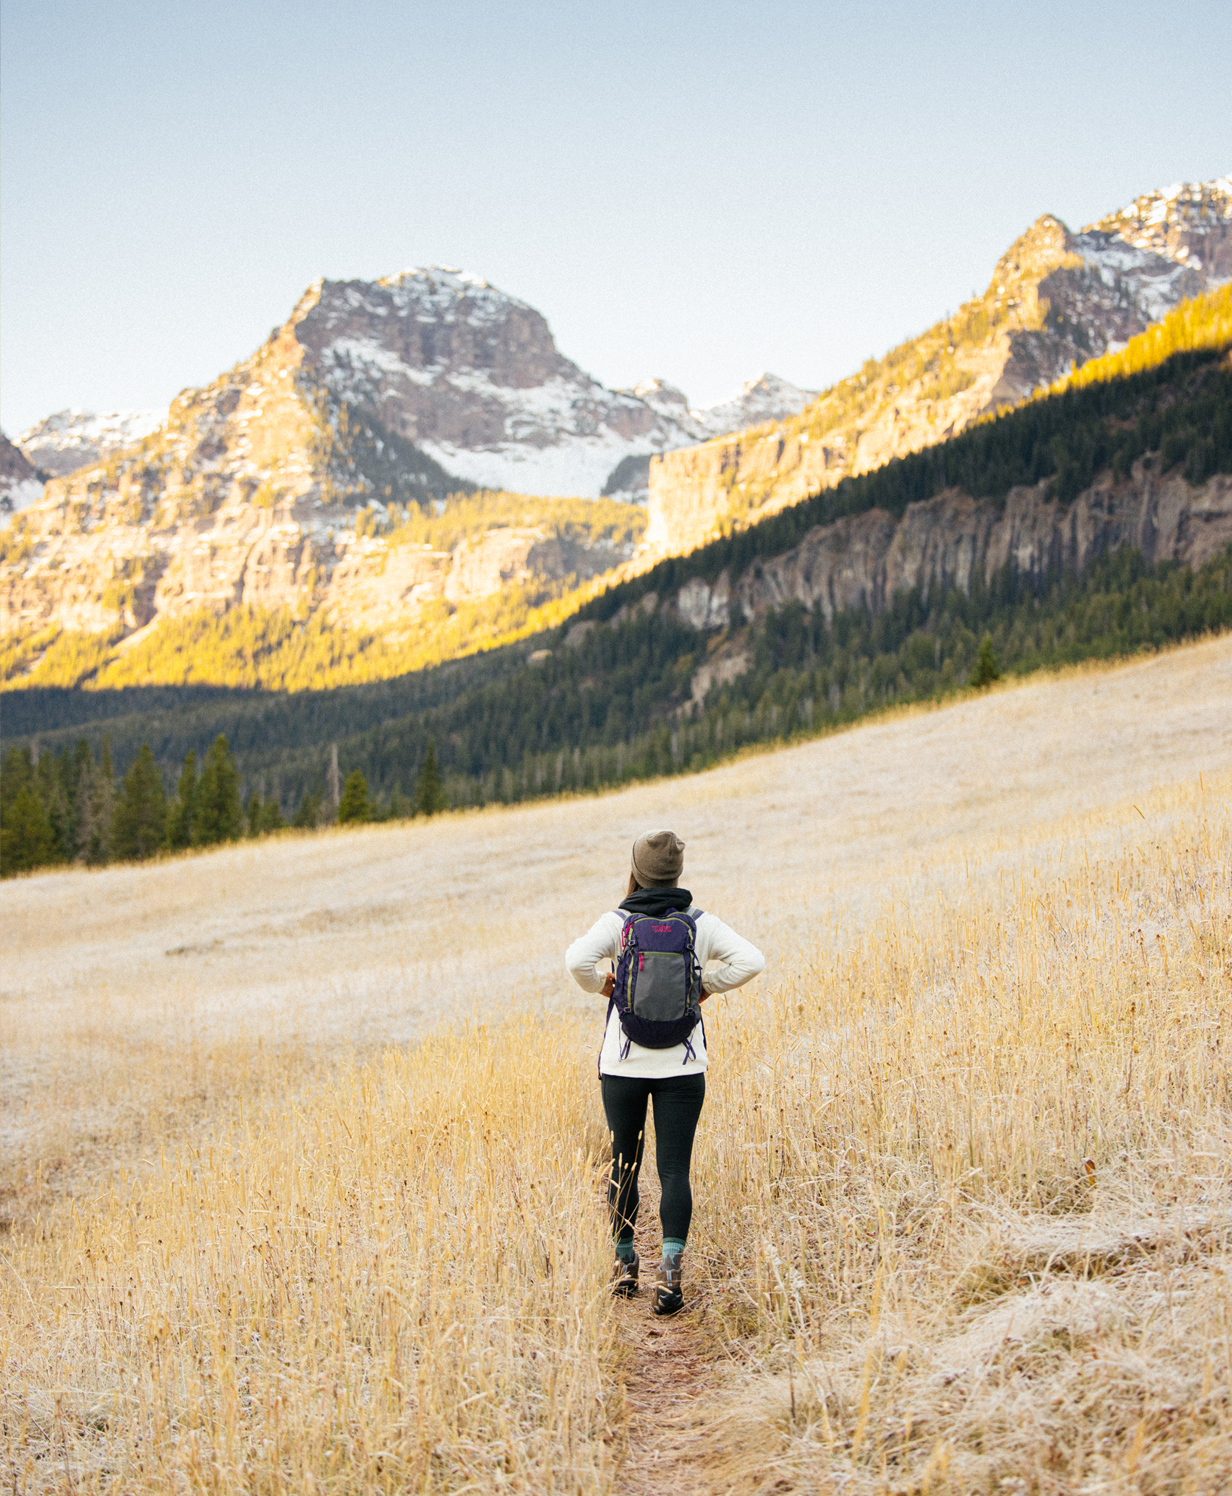 Woman hiking through a mountain meadow in the Oboz Sawtooth hiking boot.